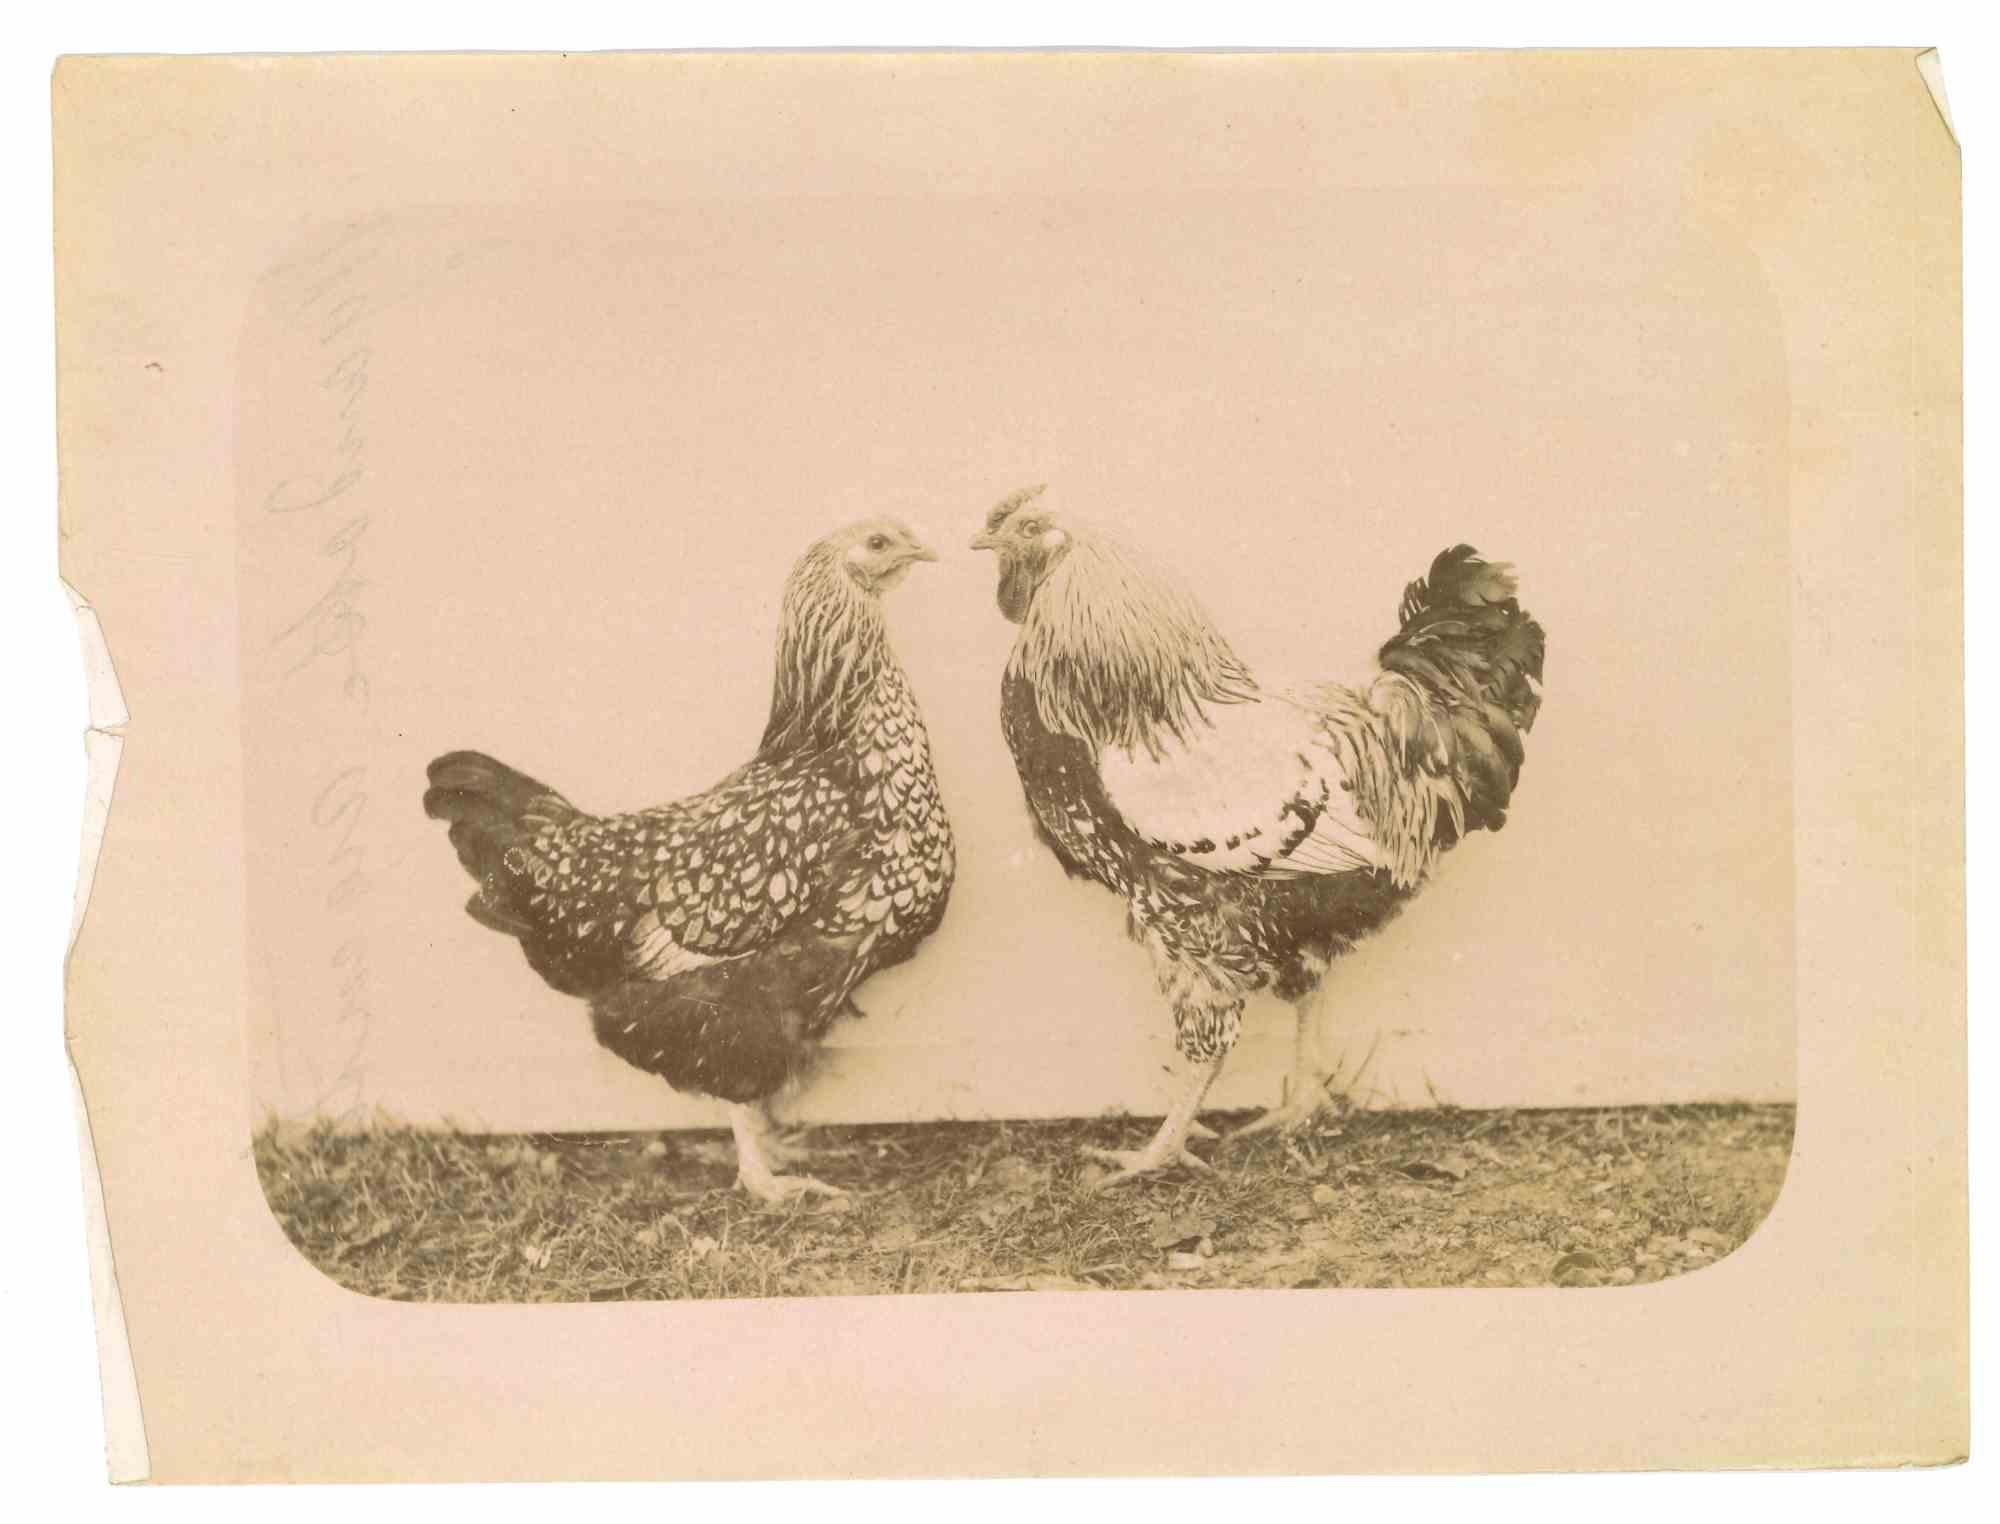 Unknown Figurative Photograph - The Old Days Photo - Fowls - Vintage Photo - Early 20th Century